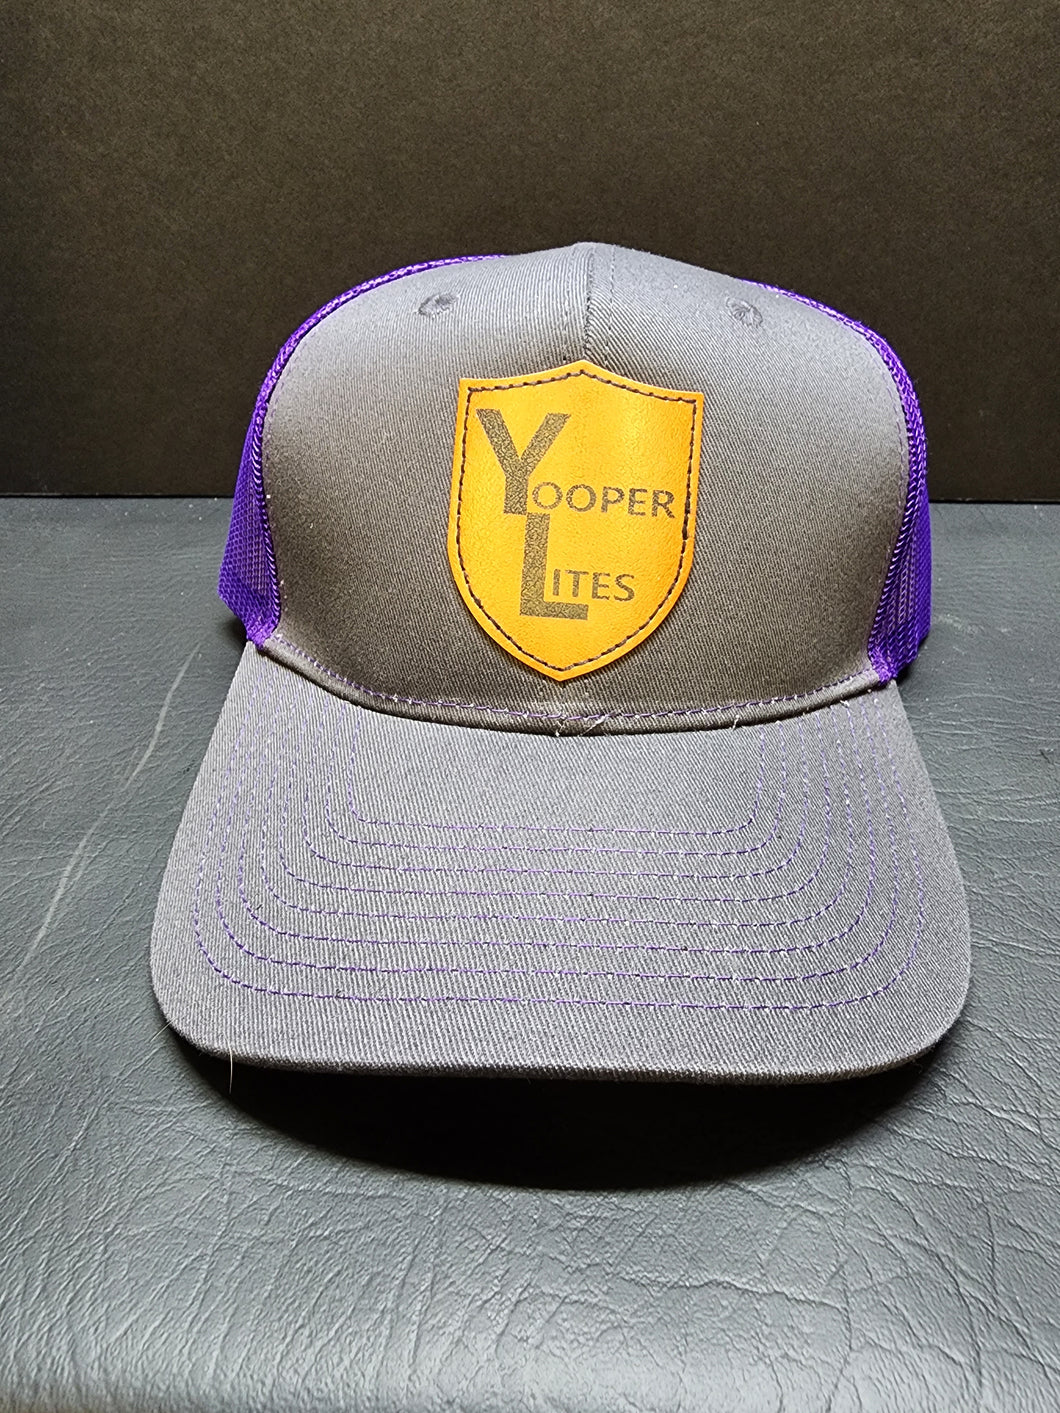 Yooperlites Purple hat with Shield patch